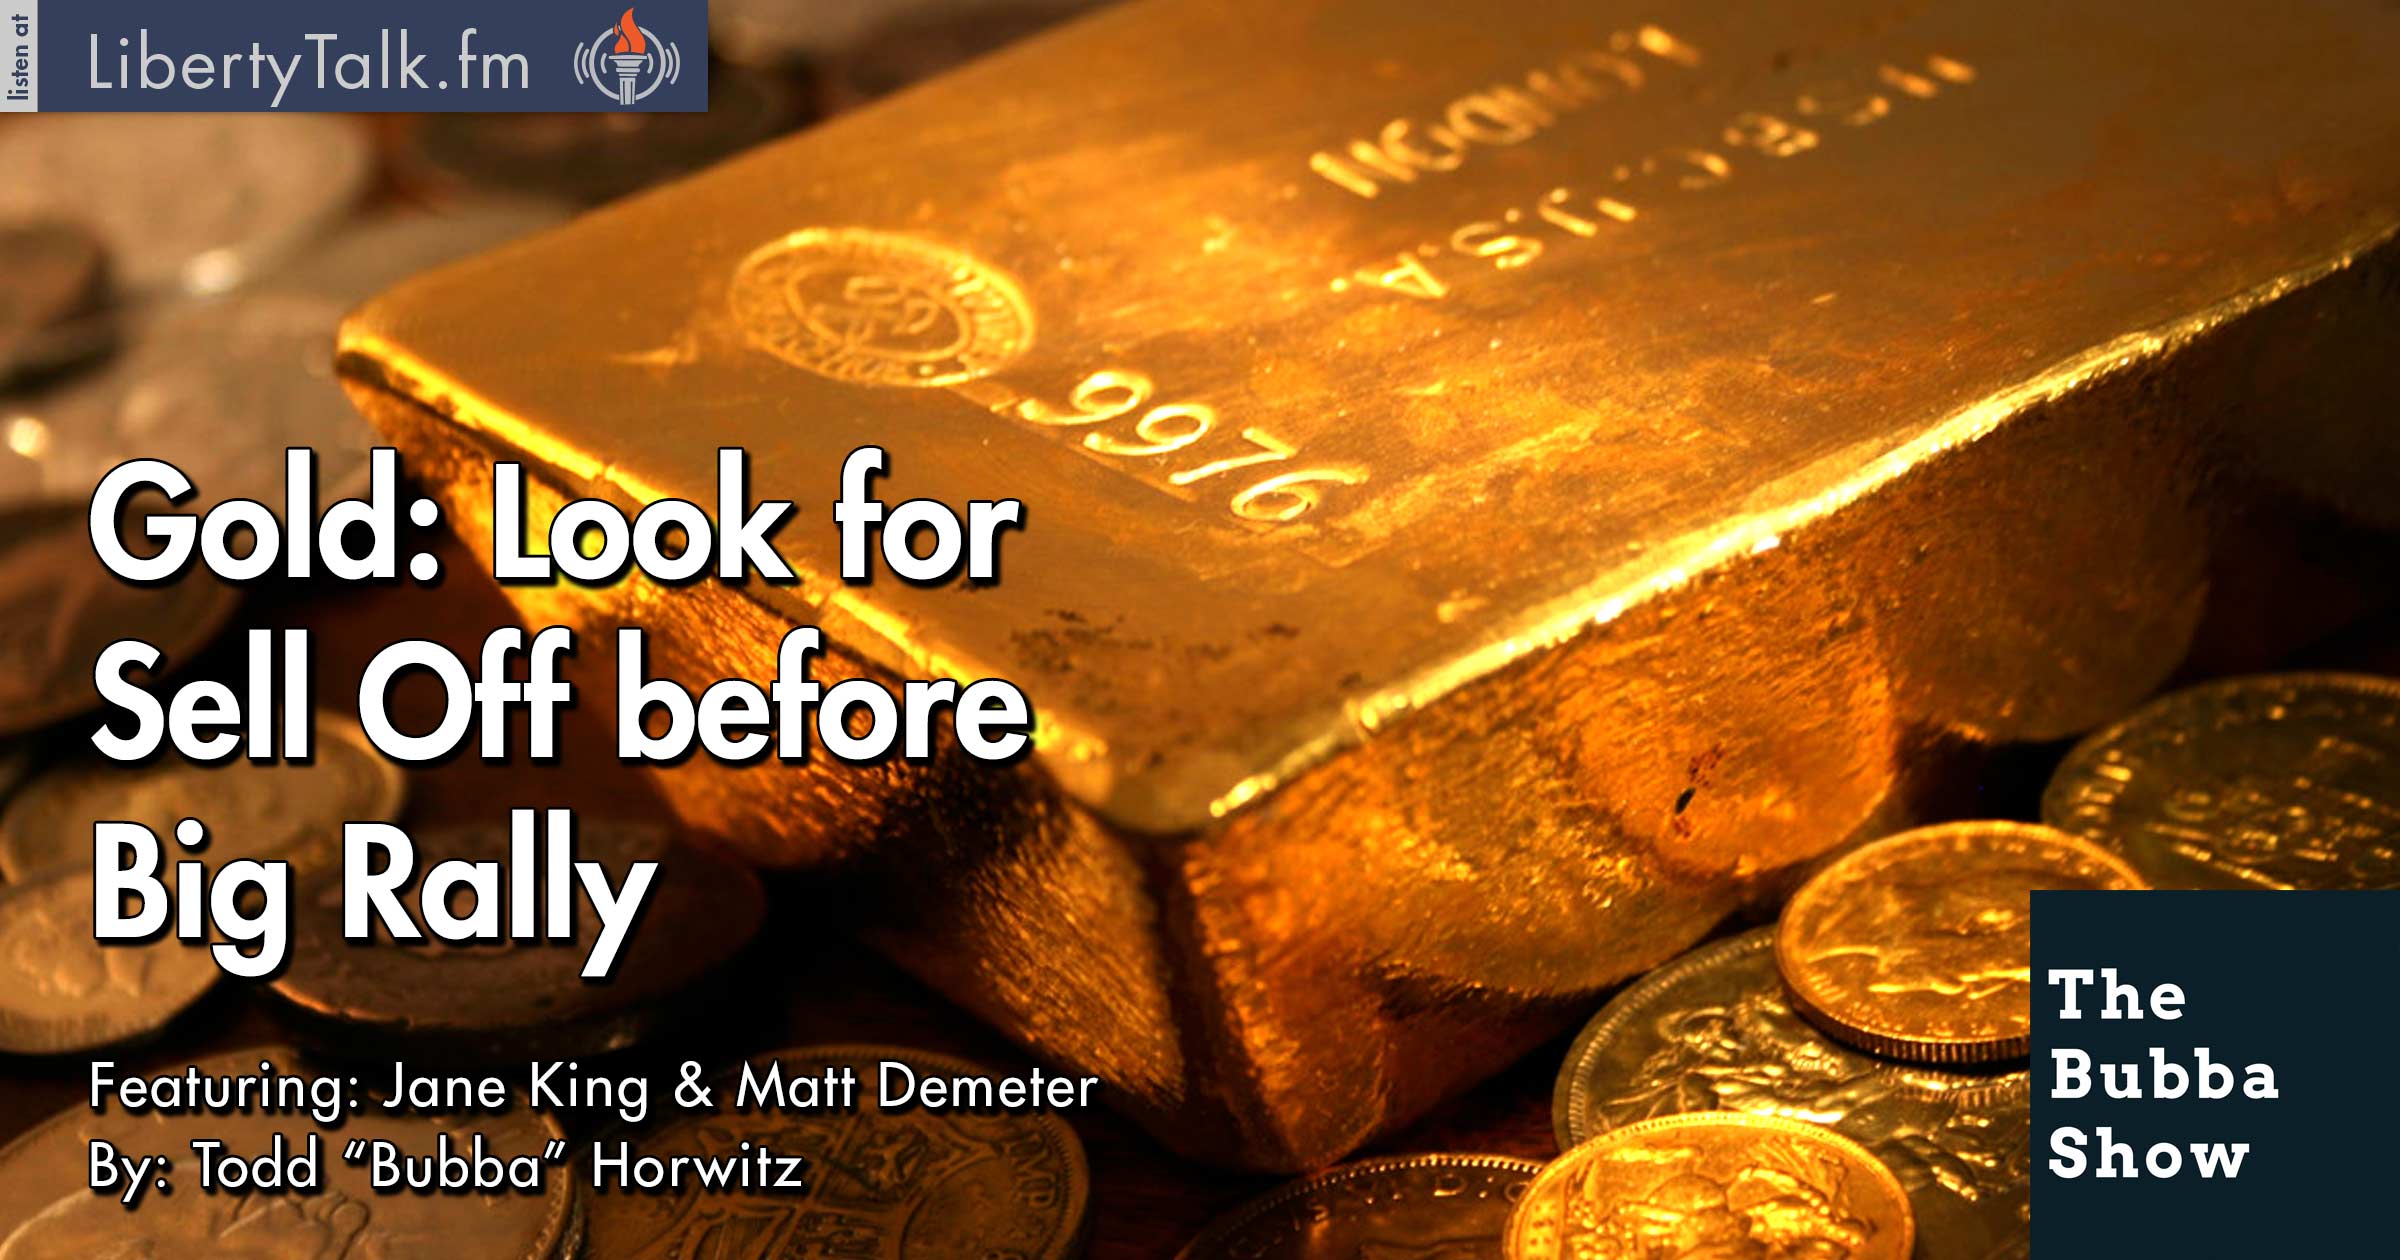 Gold: Look for Sell Off Before Big Rally - The Bubba Show